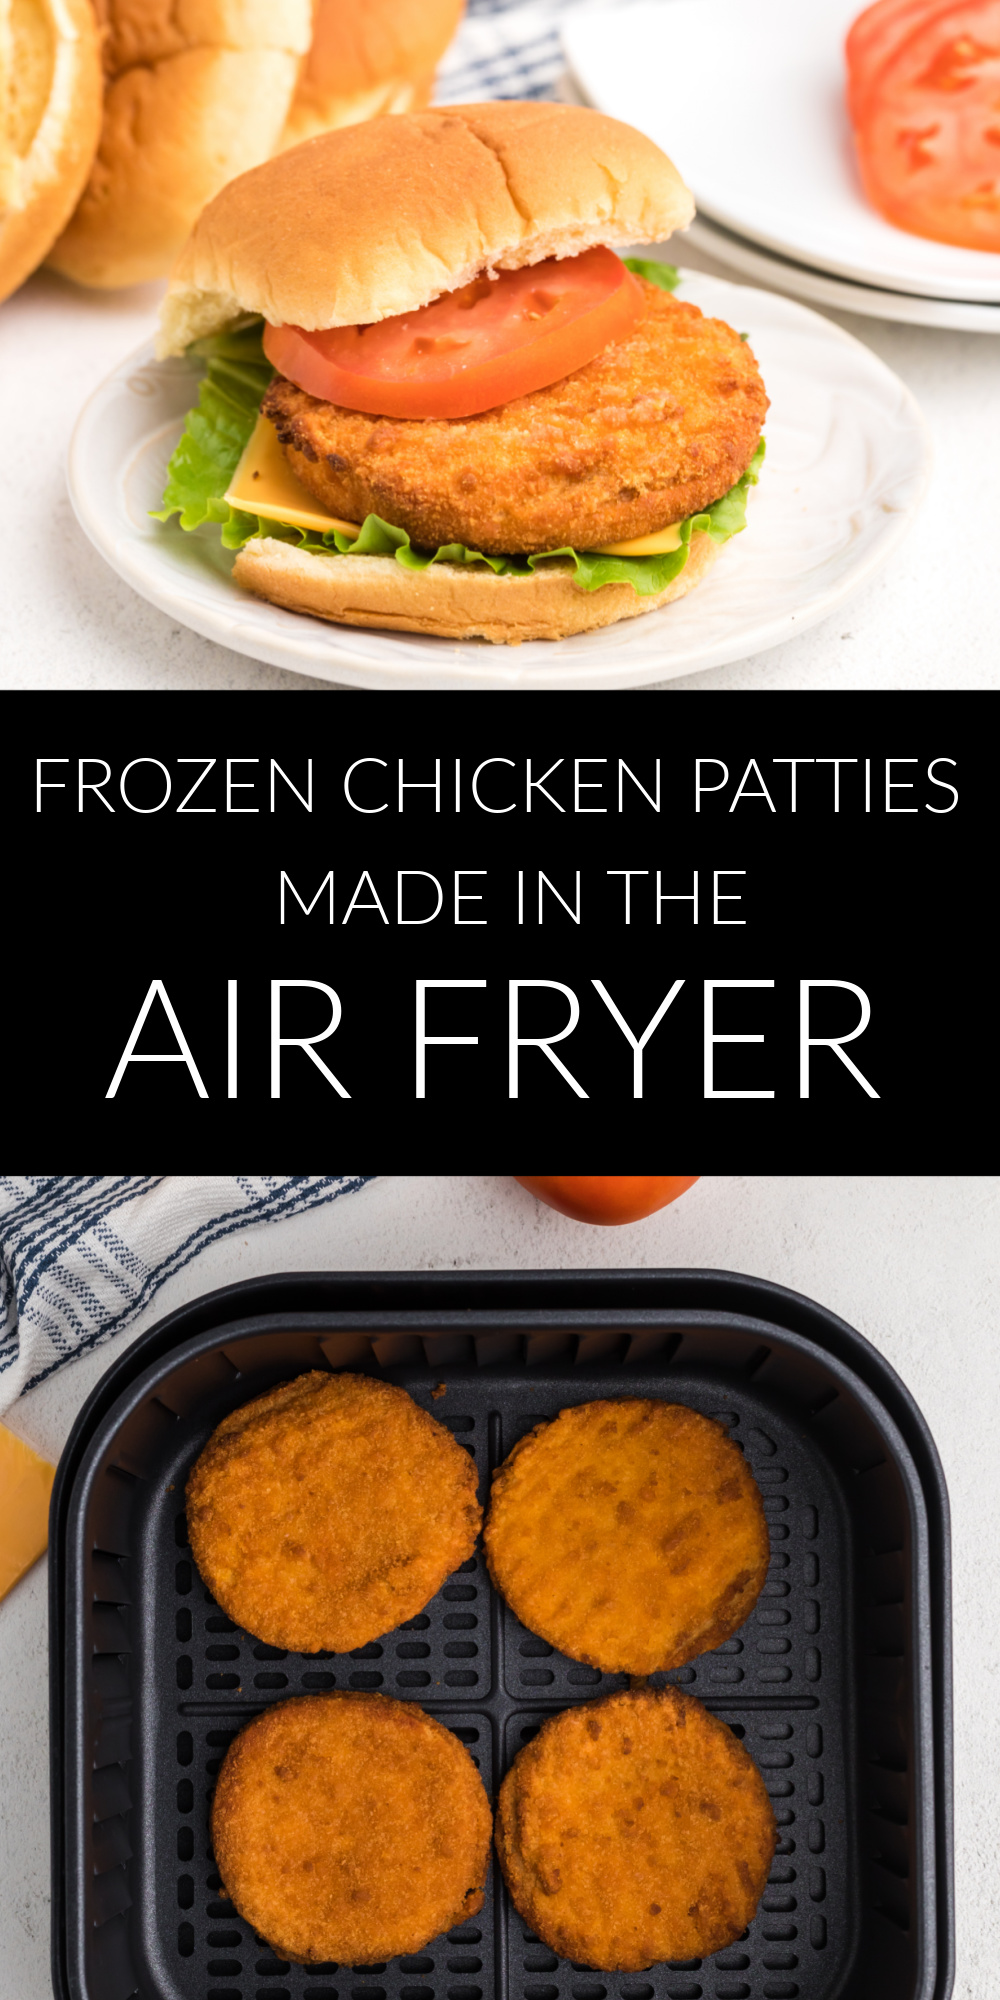 Air fryer Tyson frozen breaded chicken patties - These crispy chicken patties are absolutely incredible! Every bite is extra crispy and browned on the outside. The inside is soft, juicy, and cooked to perfection every time. Customize these chicken sandwiches by adding a bun, tomato, cheese, or any other topping you choose and you've got a quick dinner idea the whole family will enjoy!